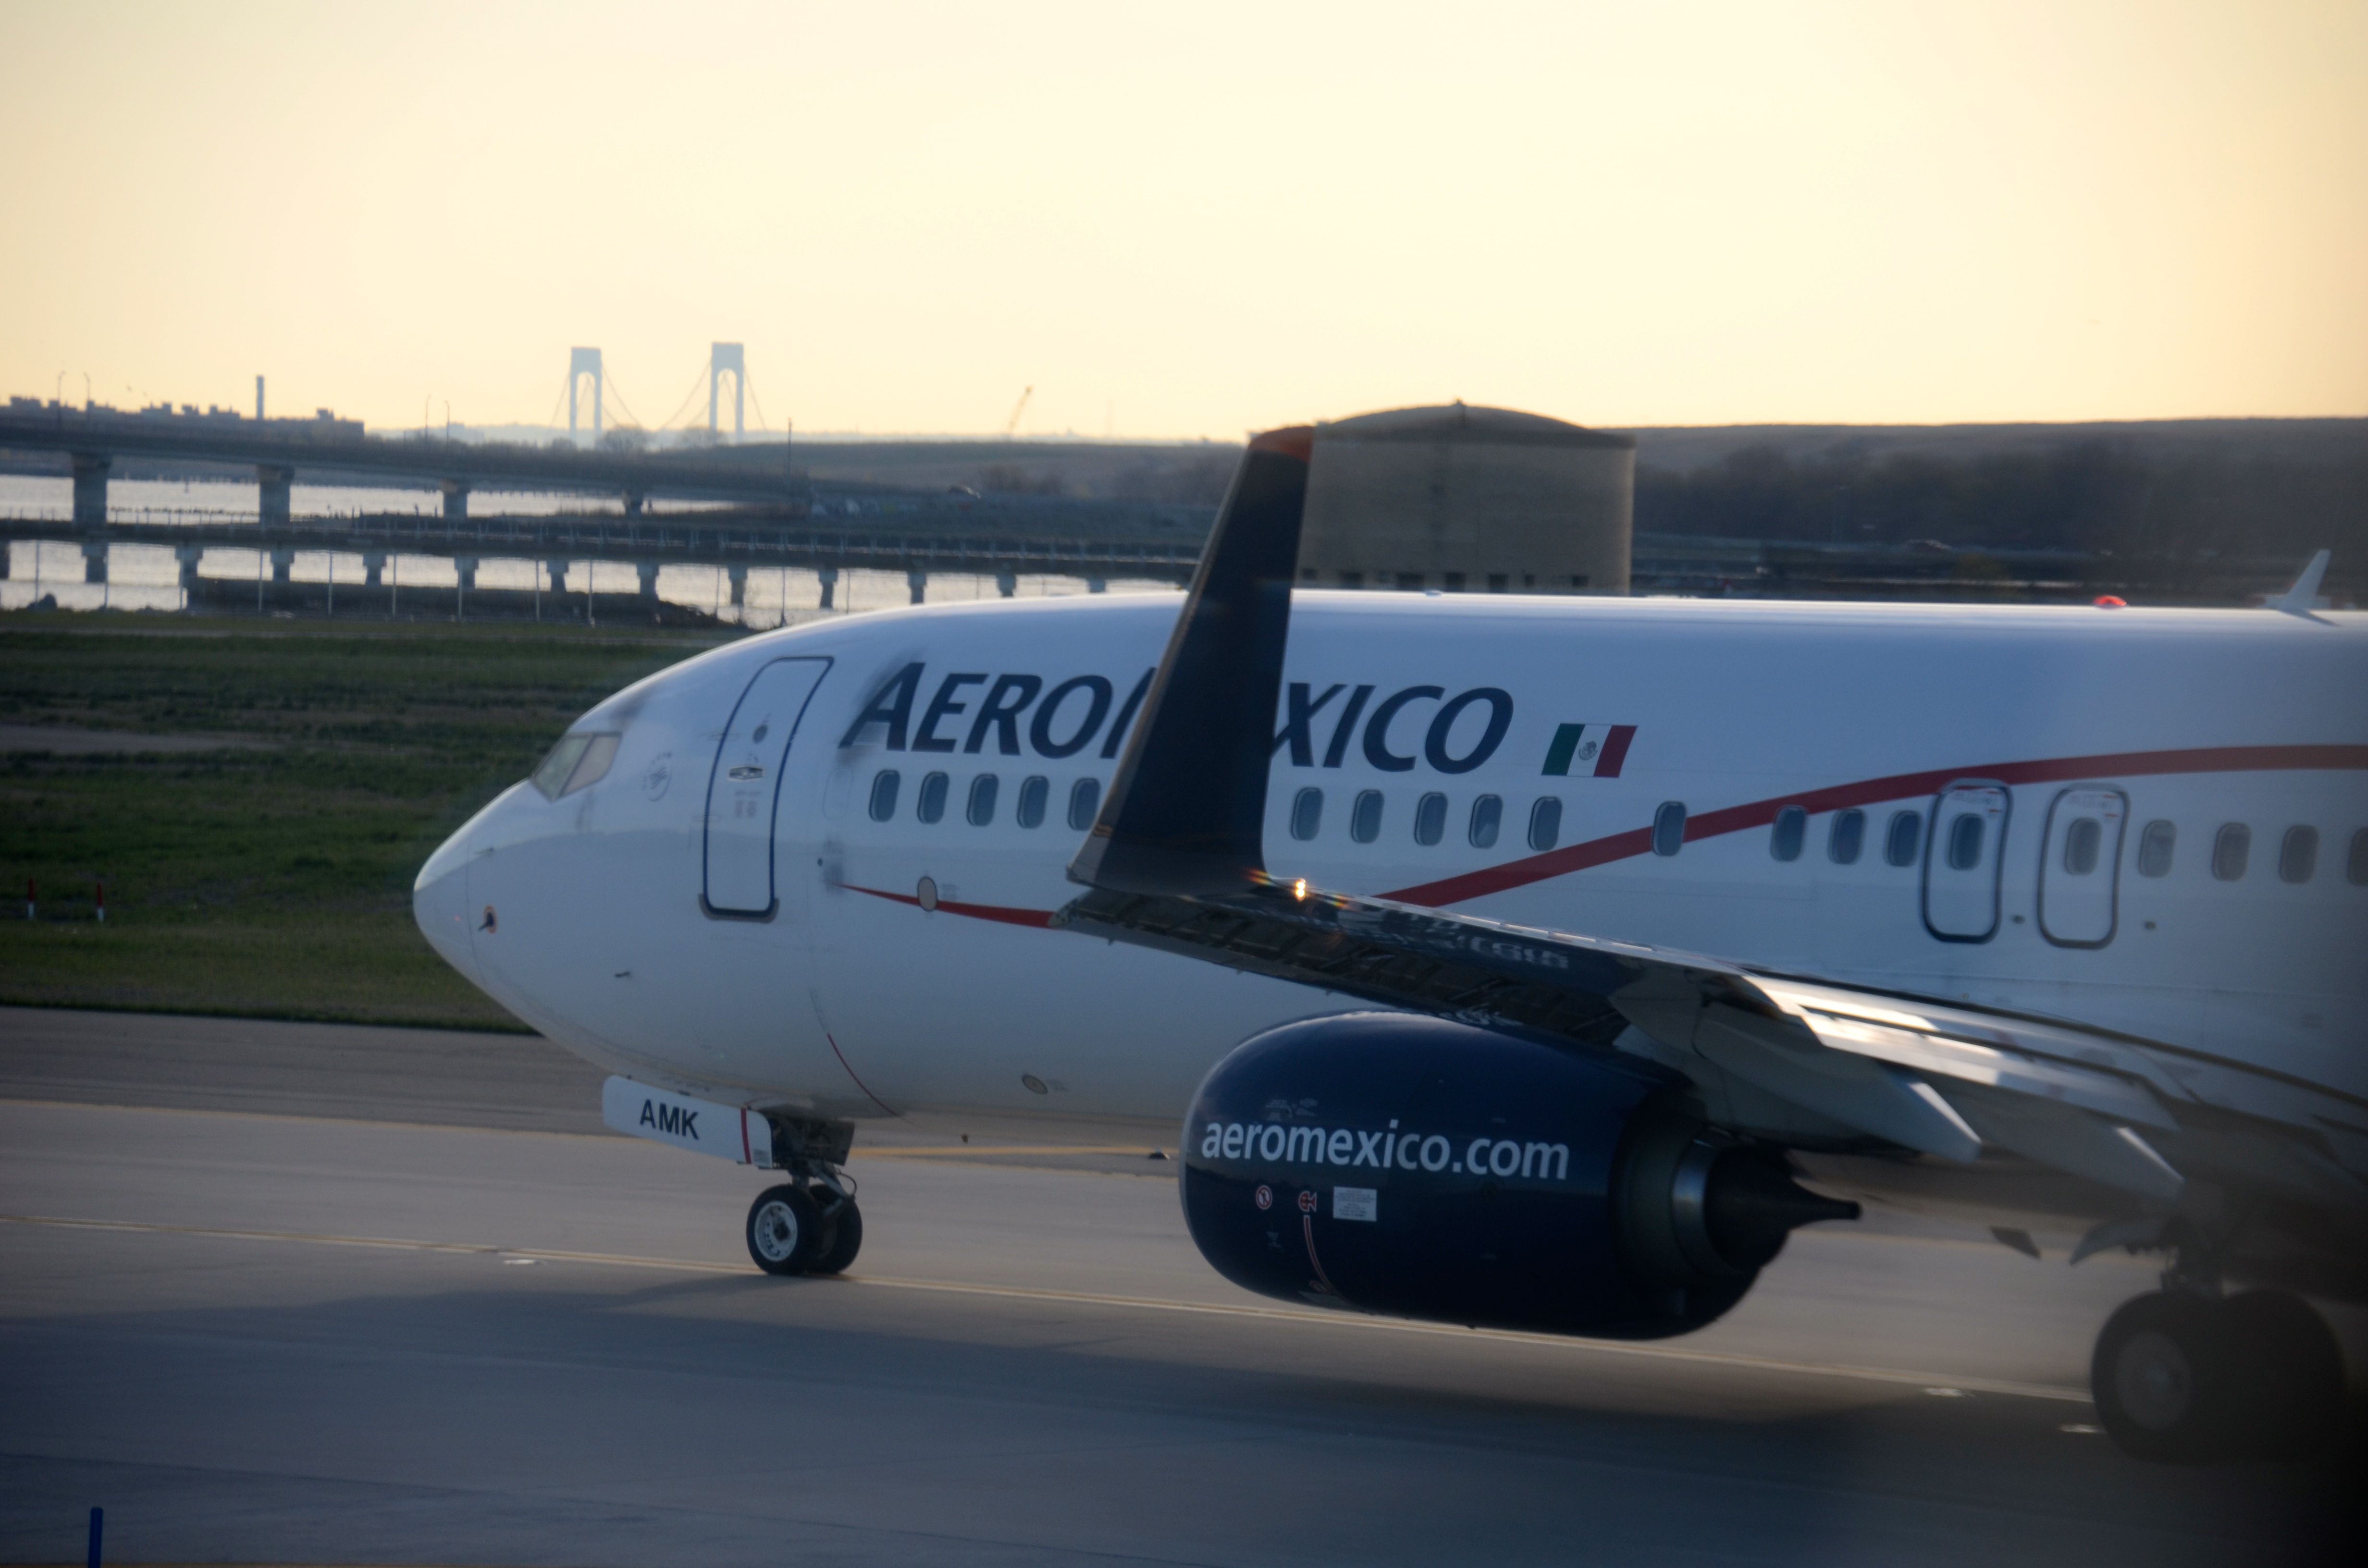 Aeromexico Takes Delivery of Second Dreamliner Frequent